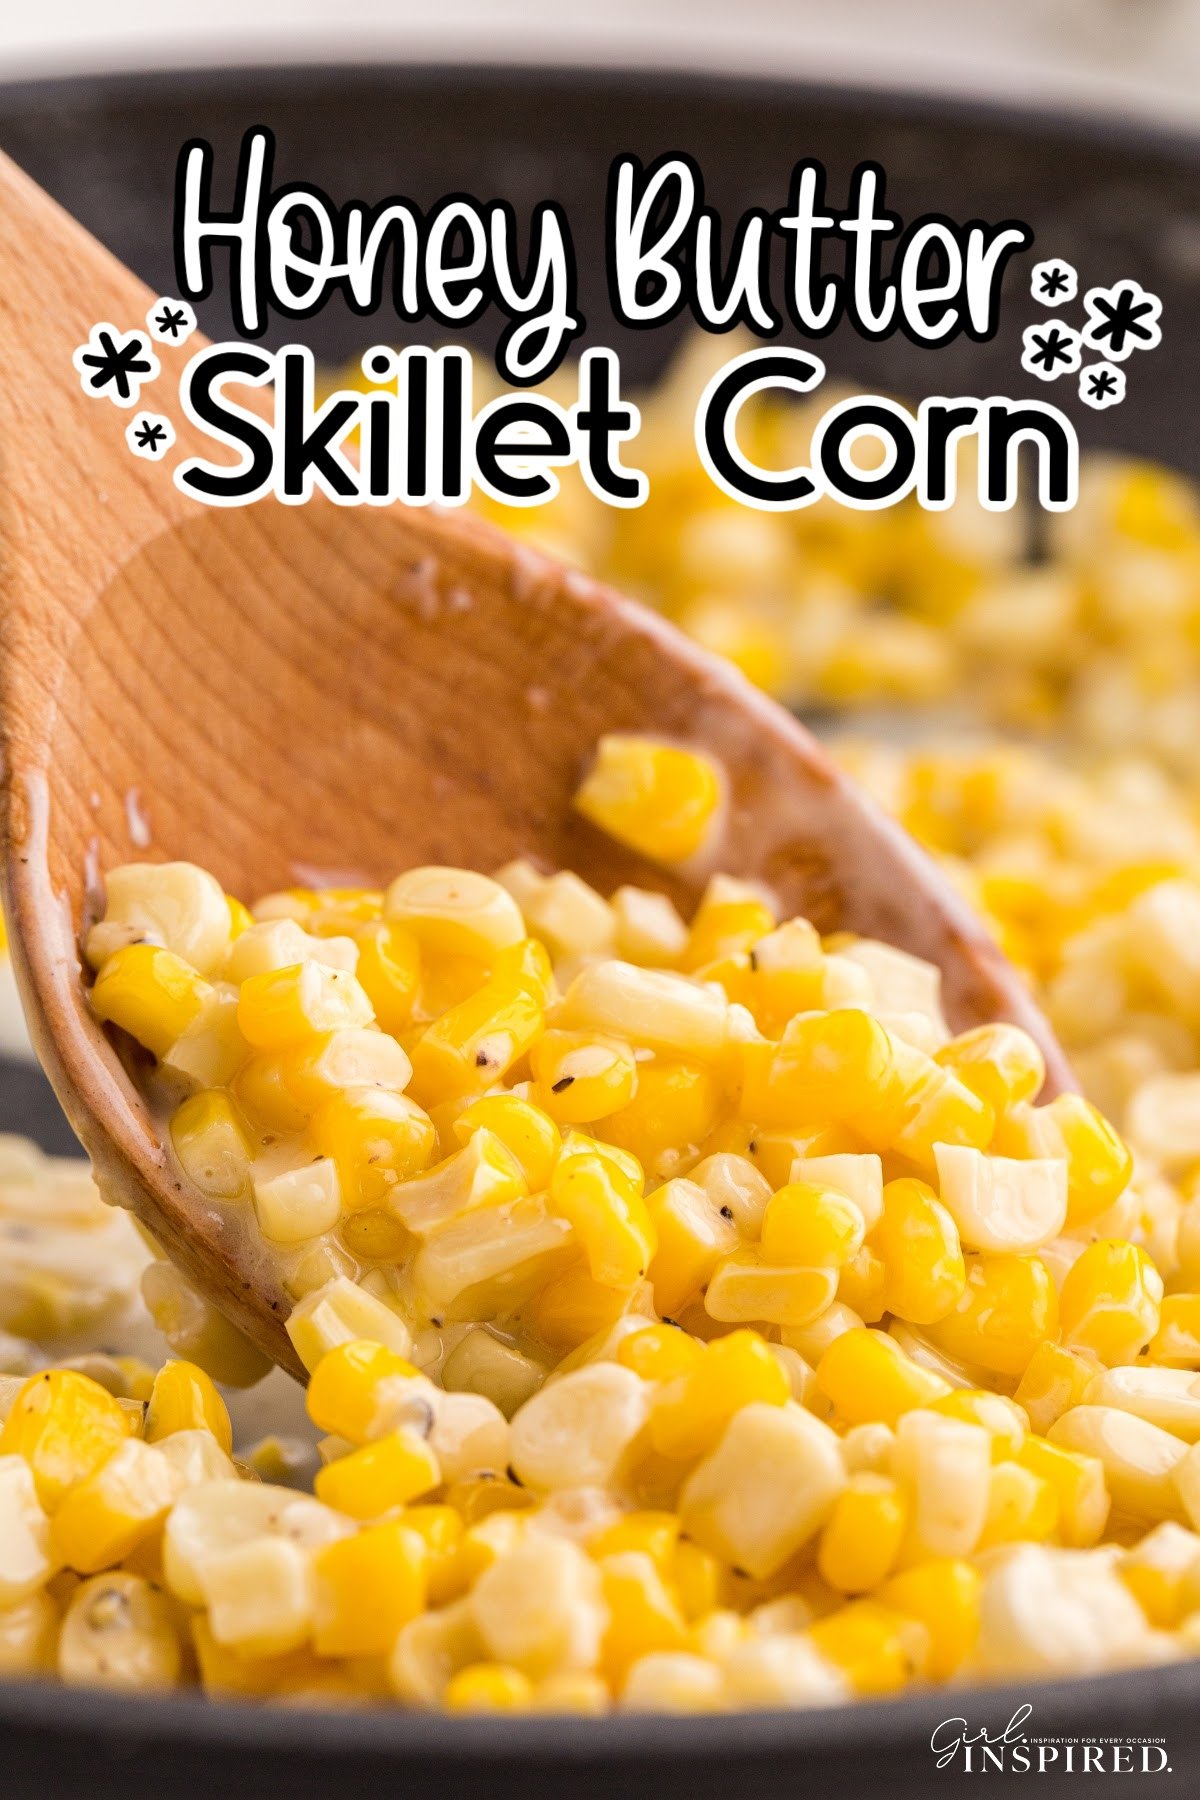 Honey Butter Skillet Corn with text overlay.